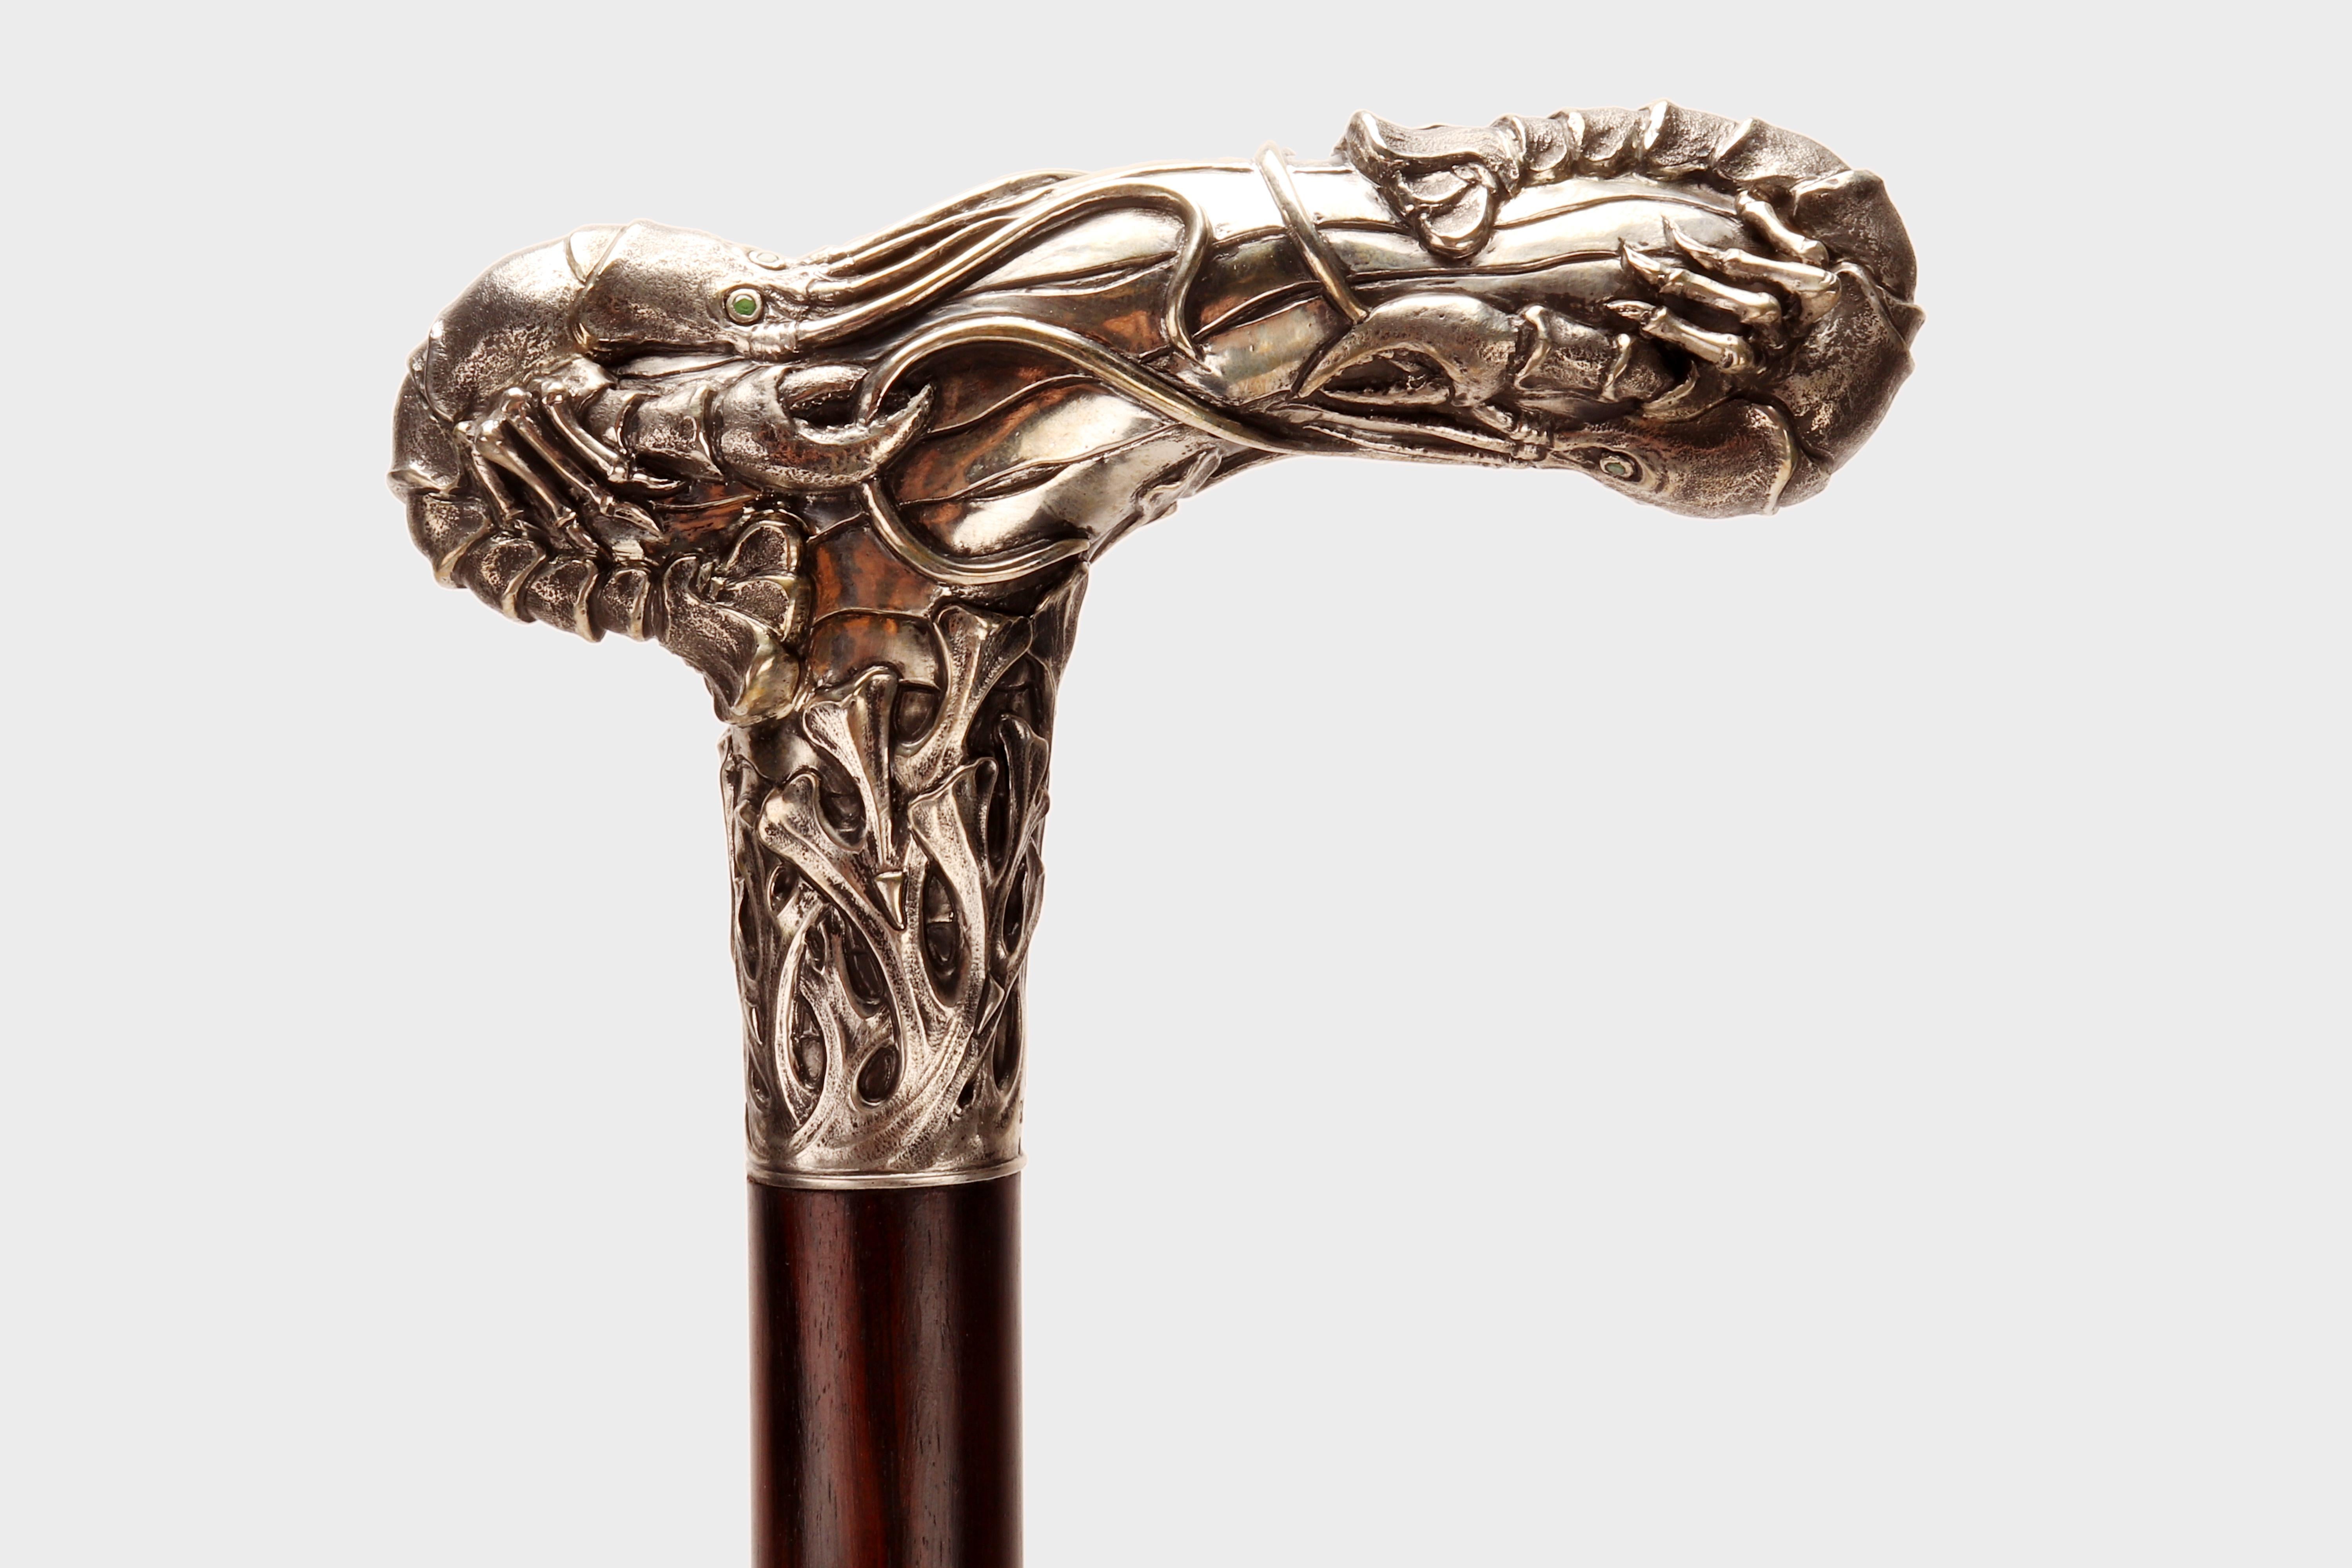 Exceptional Art Nouveau walking stick. A rare jeweled stick, L-shaped knob in 800/1000 silver, with precious stones: emeralds, depicting two lobsters in a marine environment. Ebony wood barrel. Metal tip. Signed, jeweler Christian Fjerdingstad,